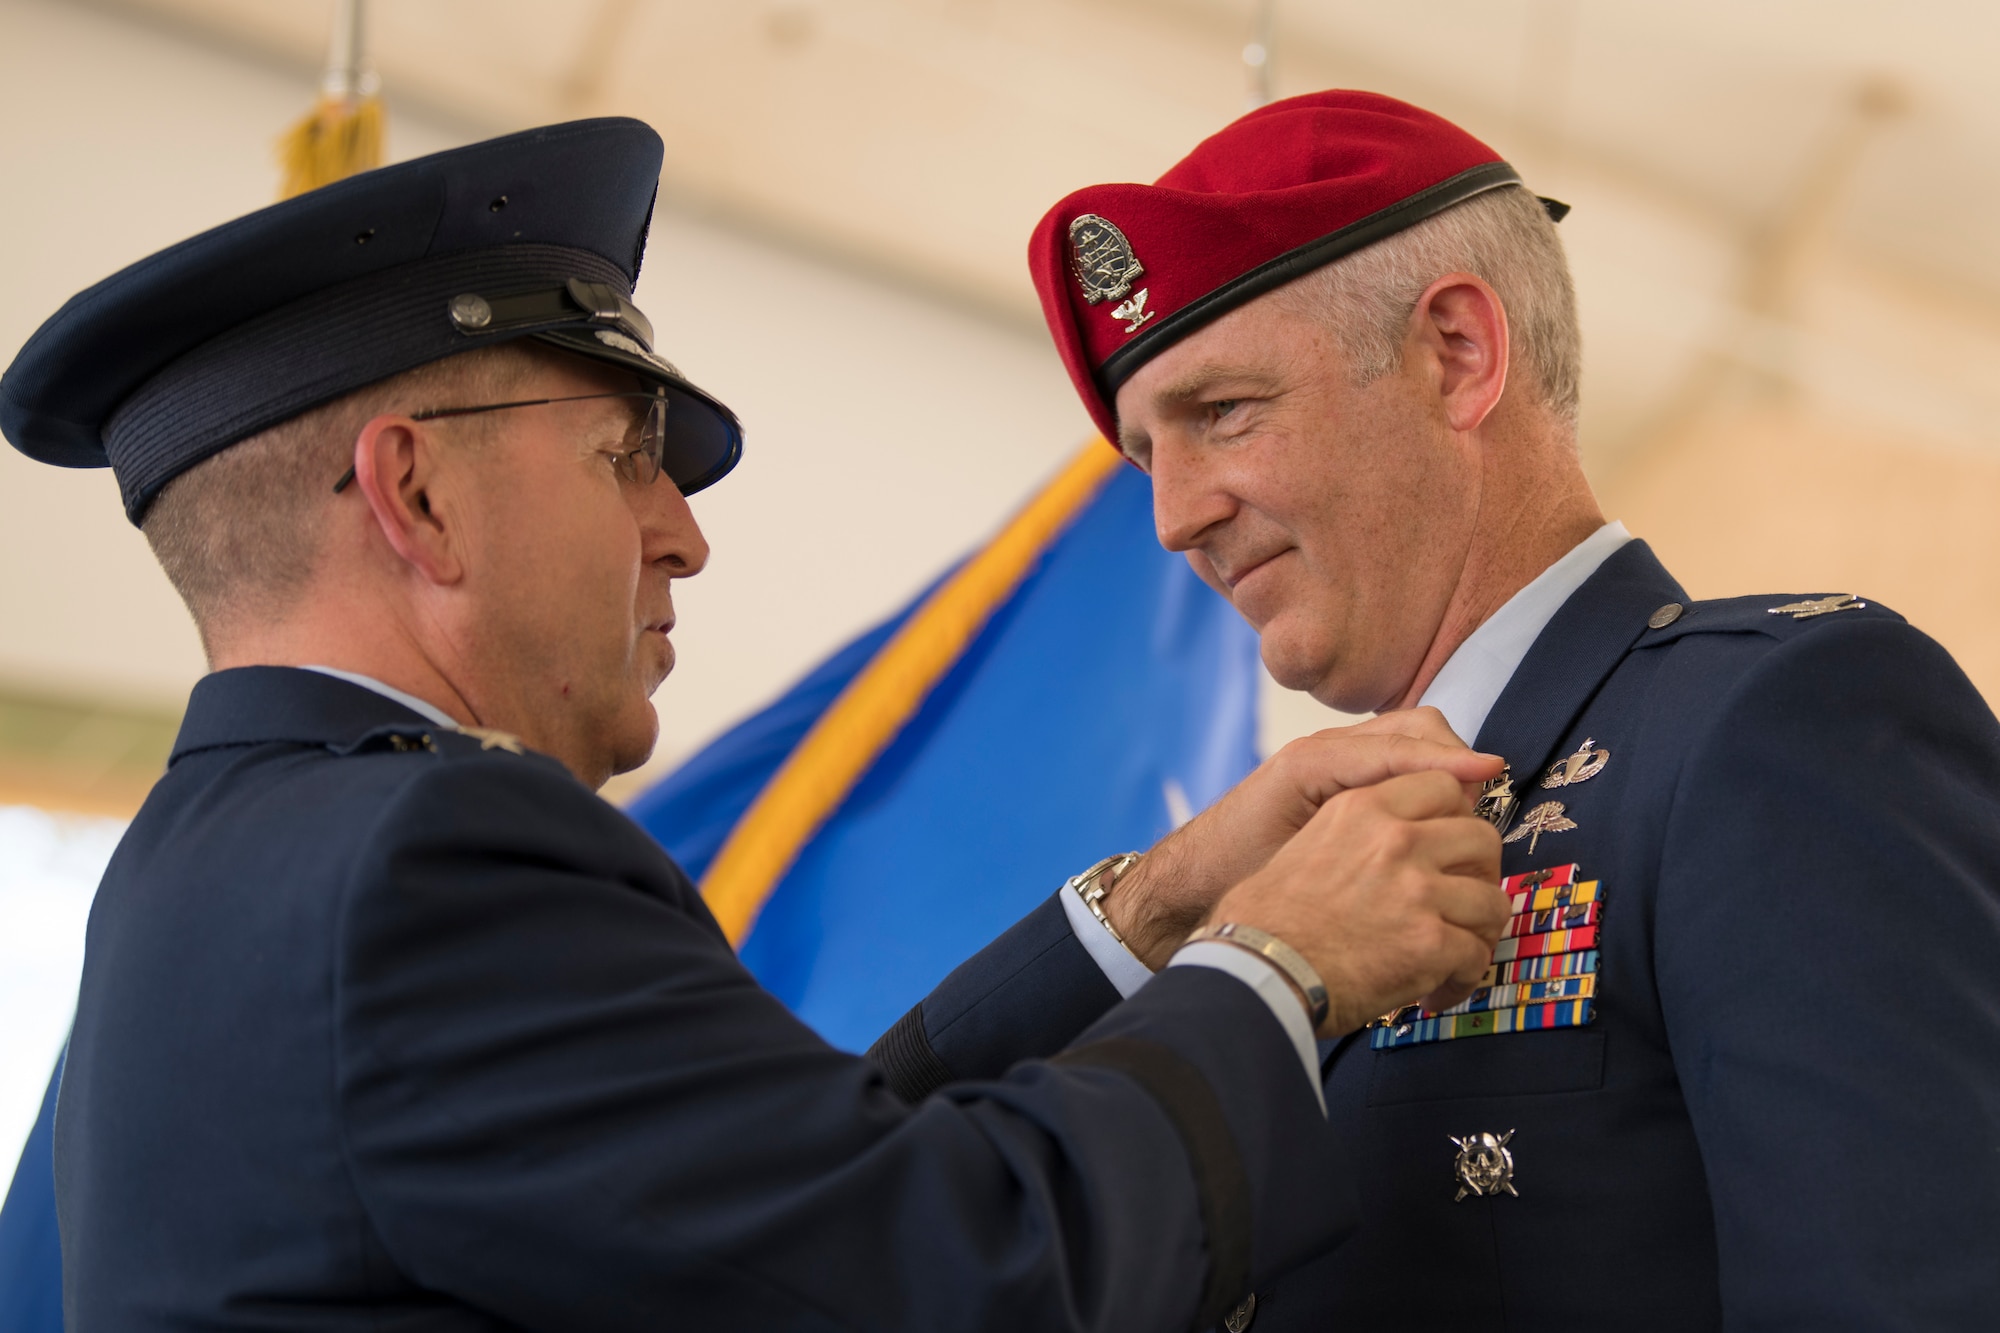 .S. Air Force Col. Matthew Allen, outgoing commander of the 24th Special Operations Wing, receives the Legion of Merit from U.S. Air Force Lt. Gen. Jim Slife, commander of Air Force Special Operations Command, during a change of command ceremony at Hurlburt Field, Florida, June 4, 2021.